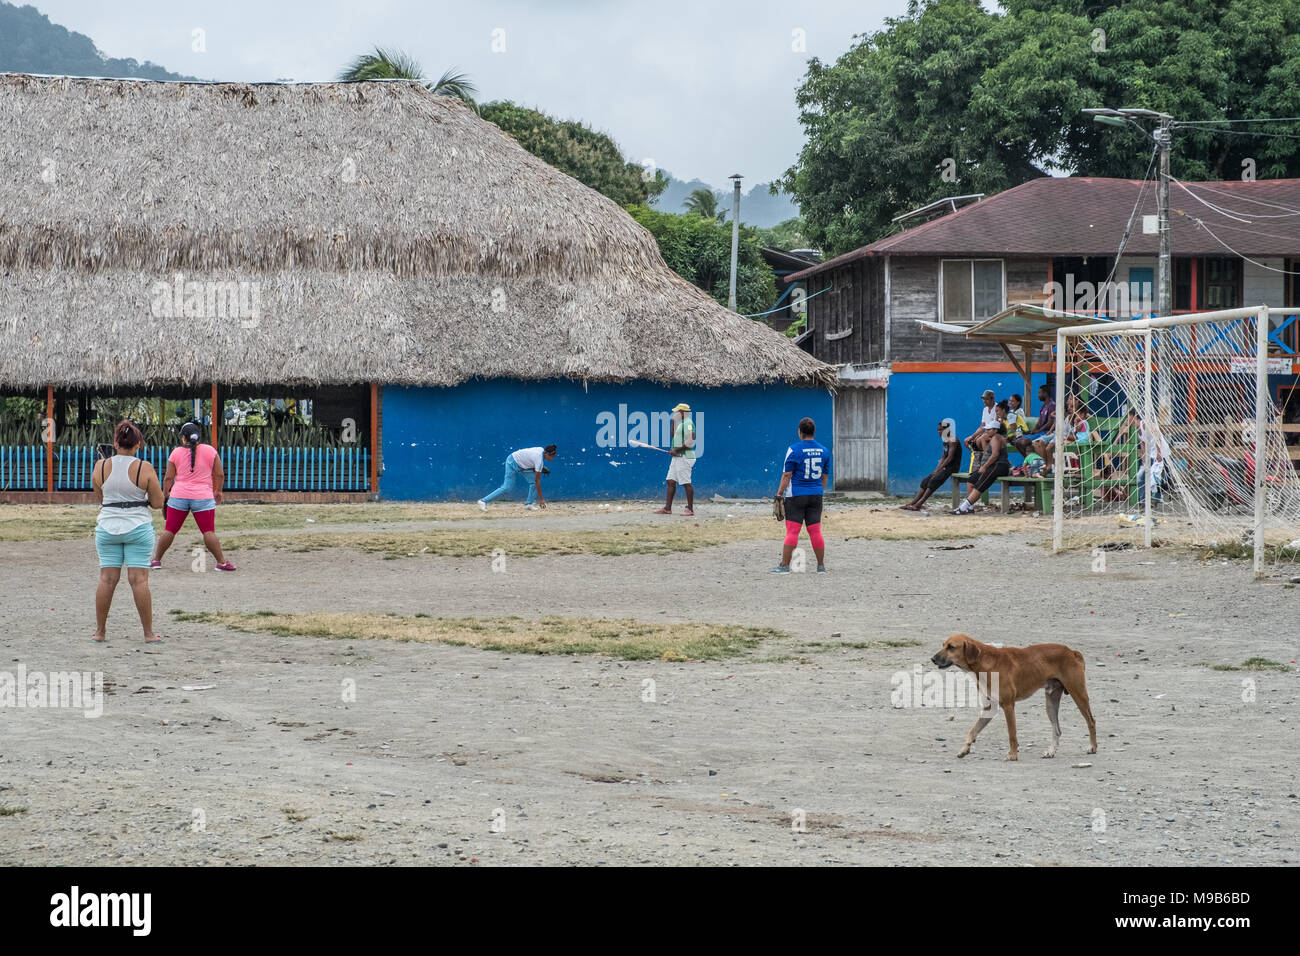 Capurgana, Colombia - march 2018: Street scene of people playing baseball at village center in  Capurgana, Colombia Stock Photo